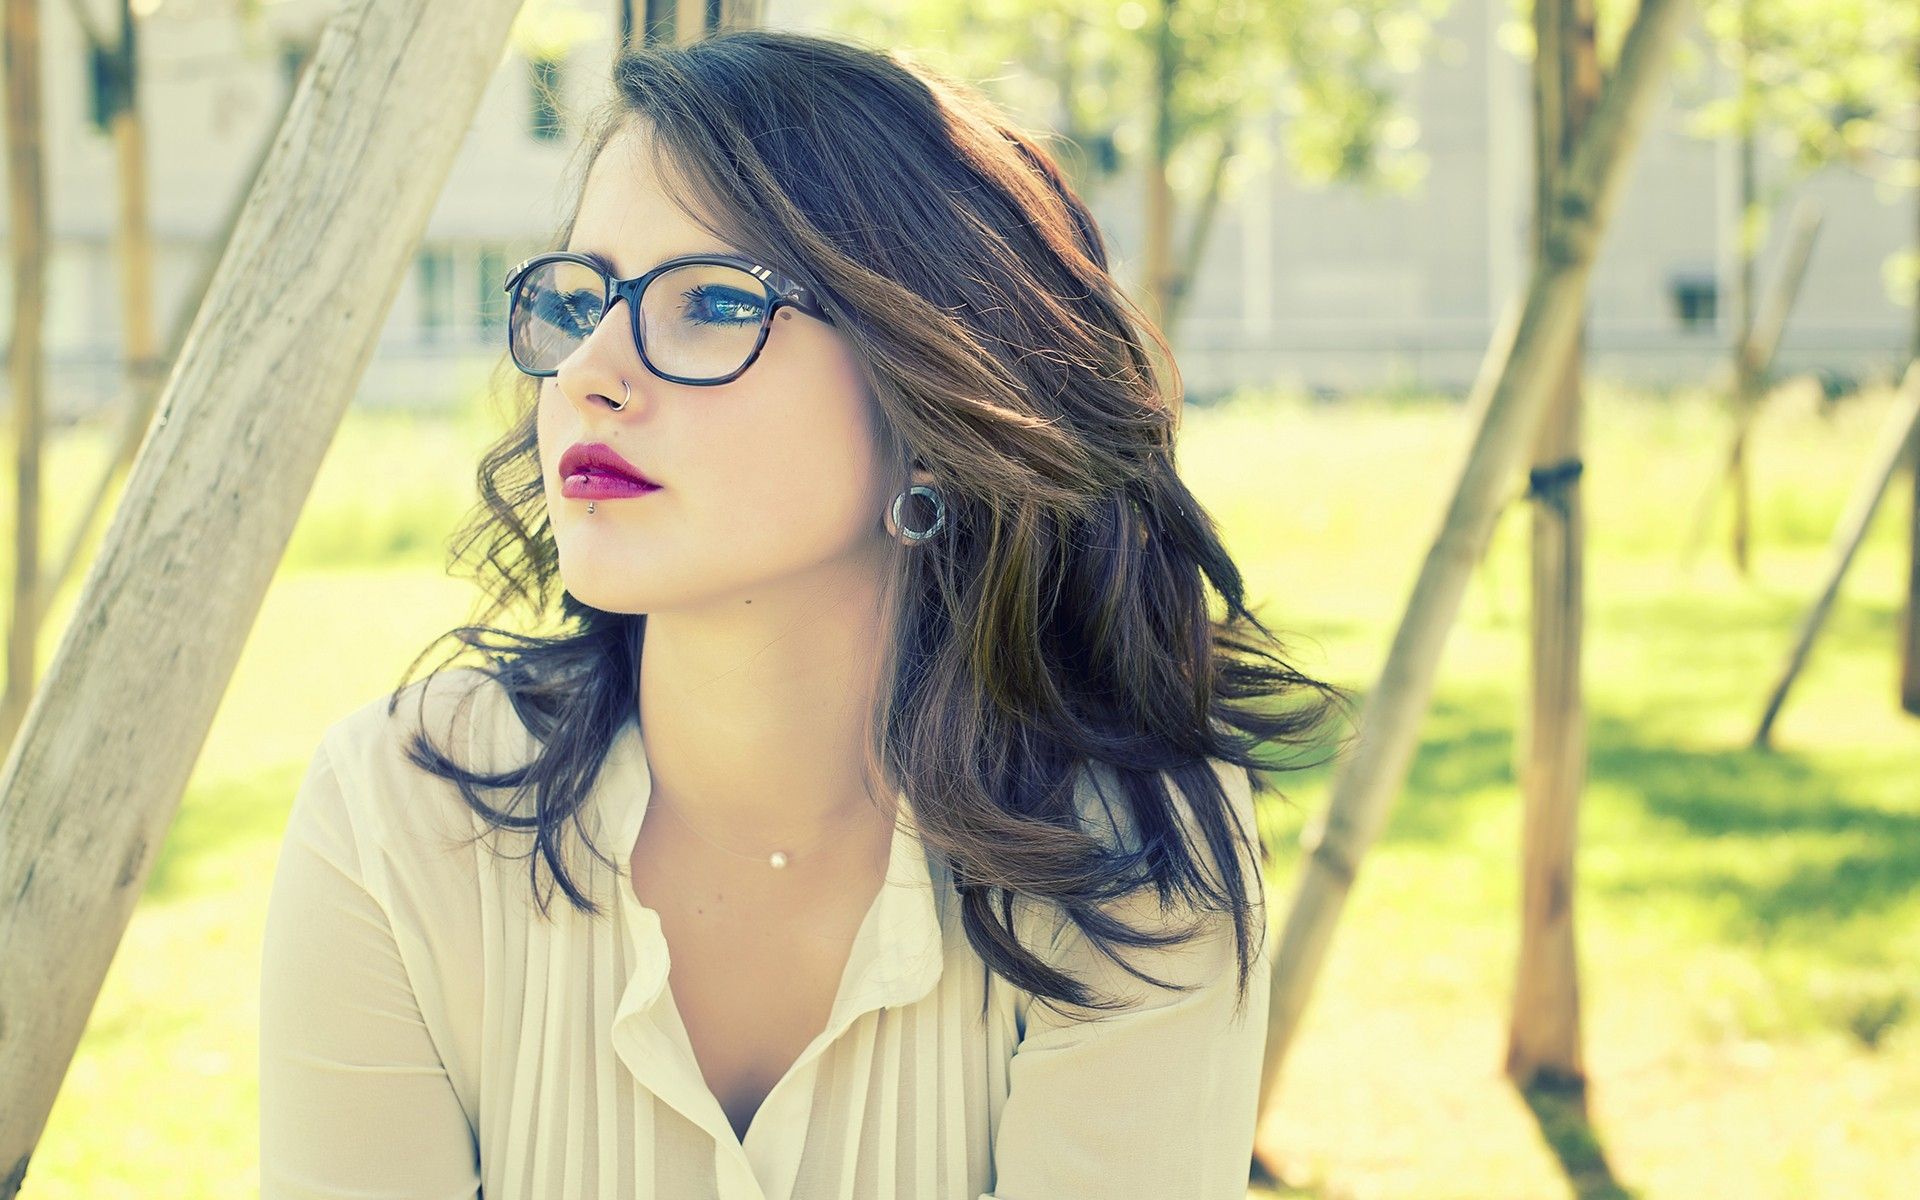 Girls With Glasses Wallpaper